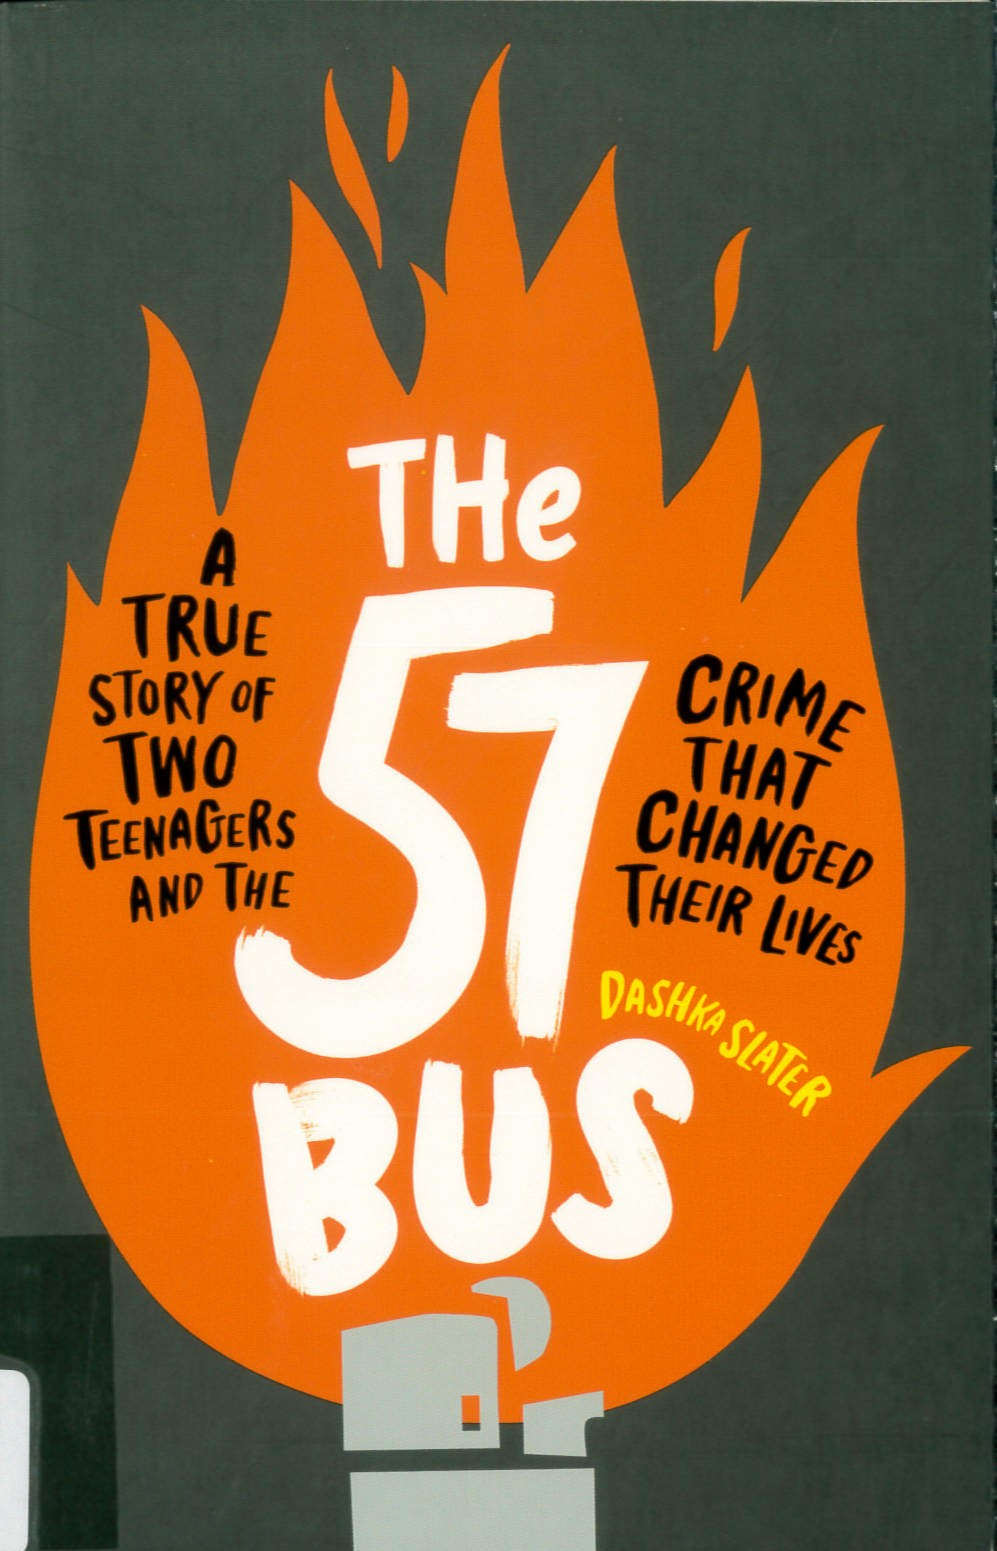 The 57 bus : a true story of two teenagers and the crime that changed their lives /